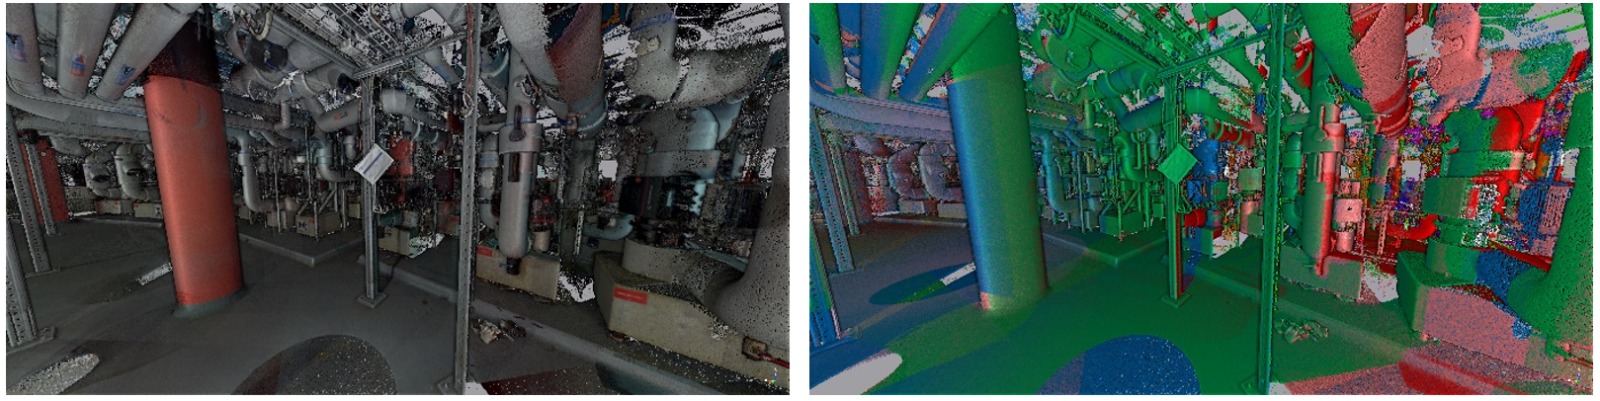 EDF point cloud dataset : Point cloud coloured according to the RGB value (left) and station index (right)